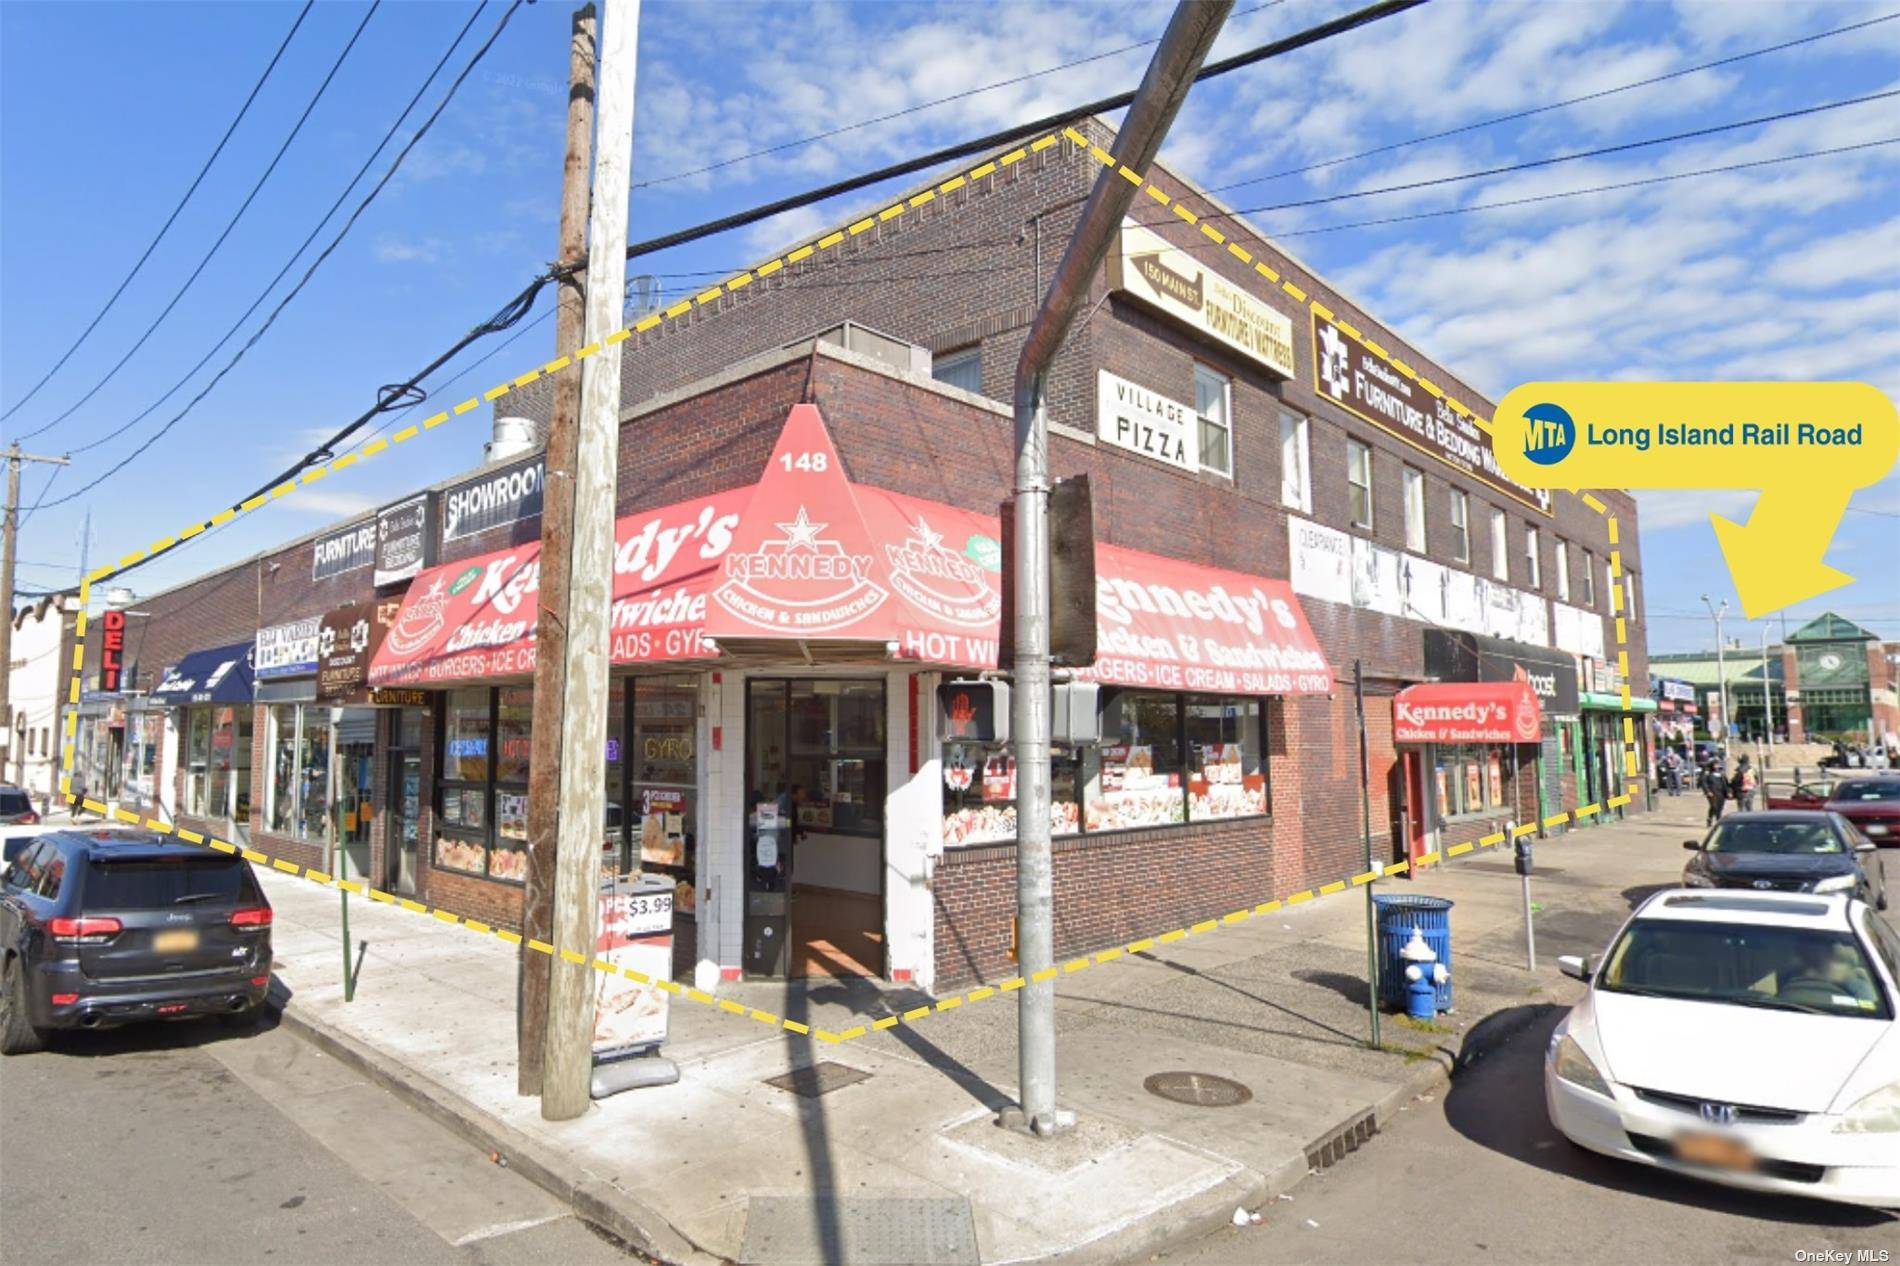 This prime retail investment property is at 158 Main Street, Hempstead, NY.